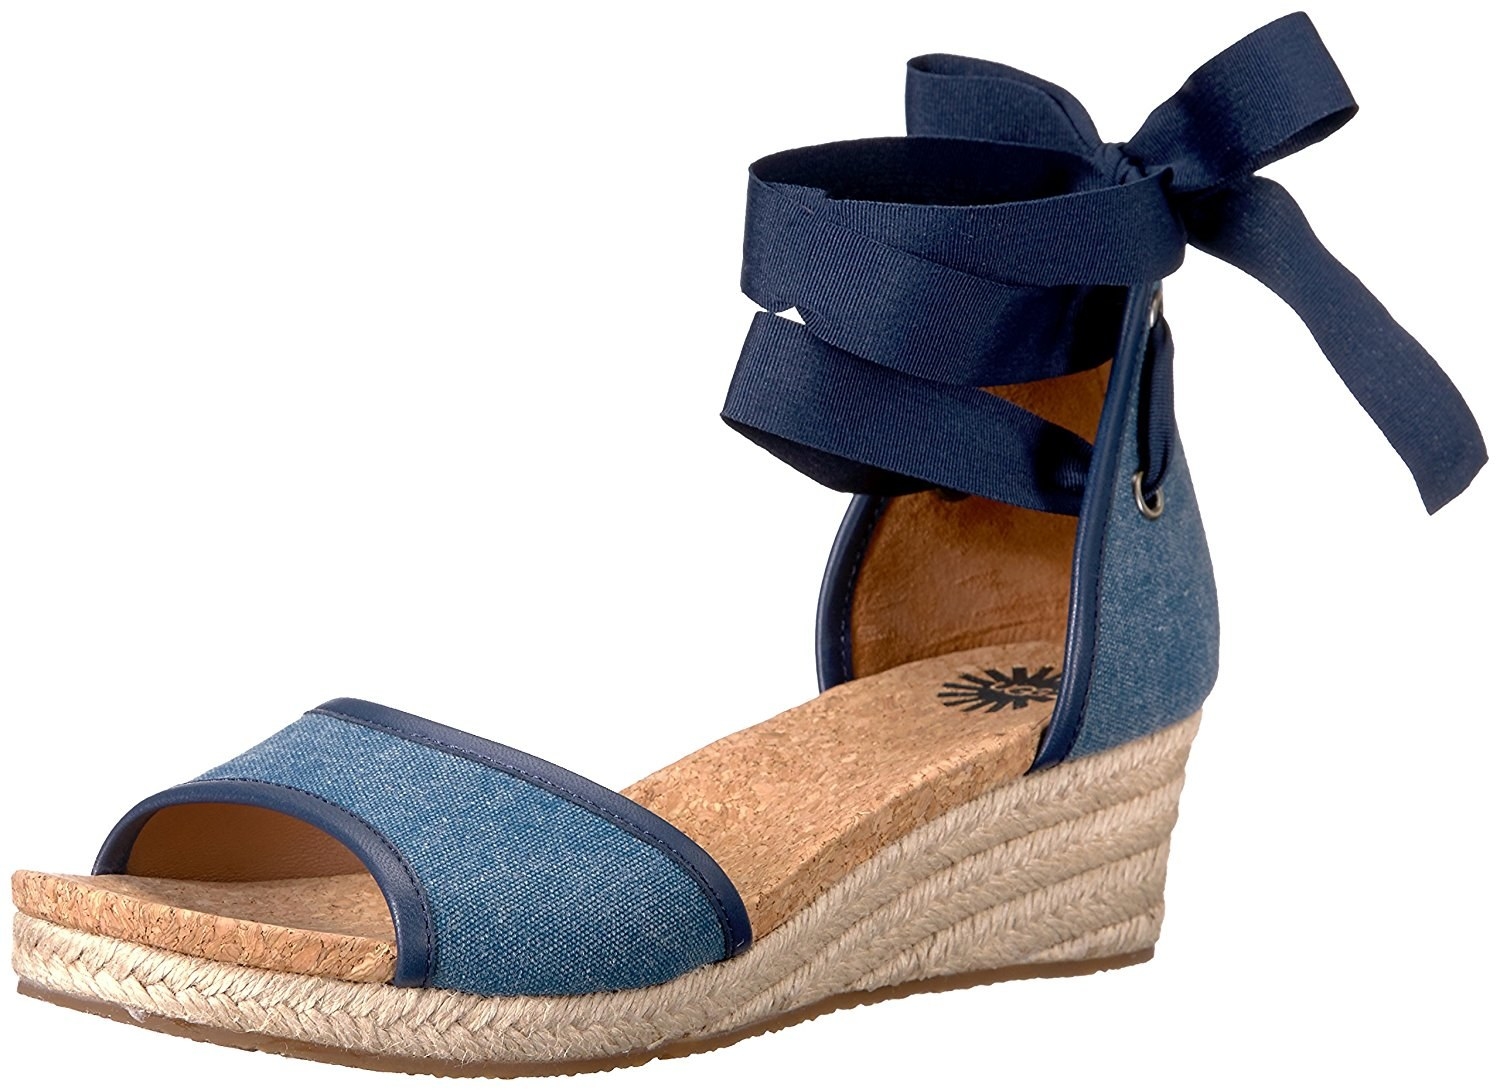 Best Places To Buy Cheap Sandals Online